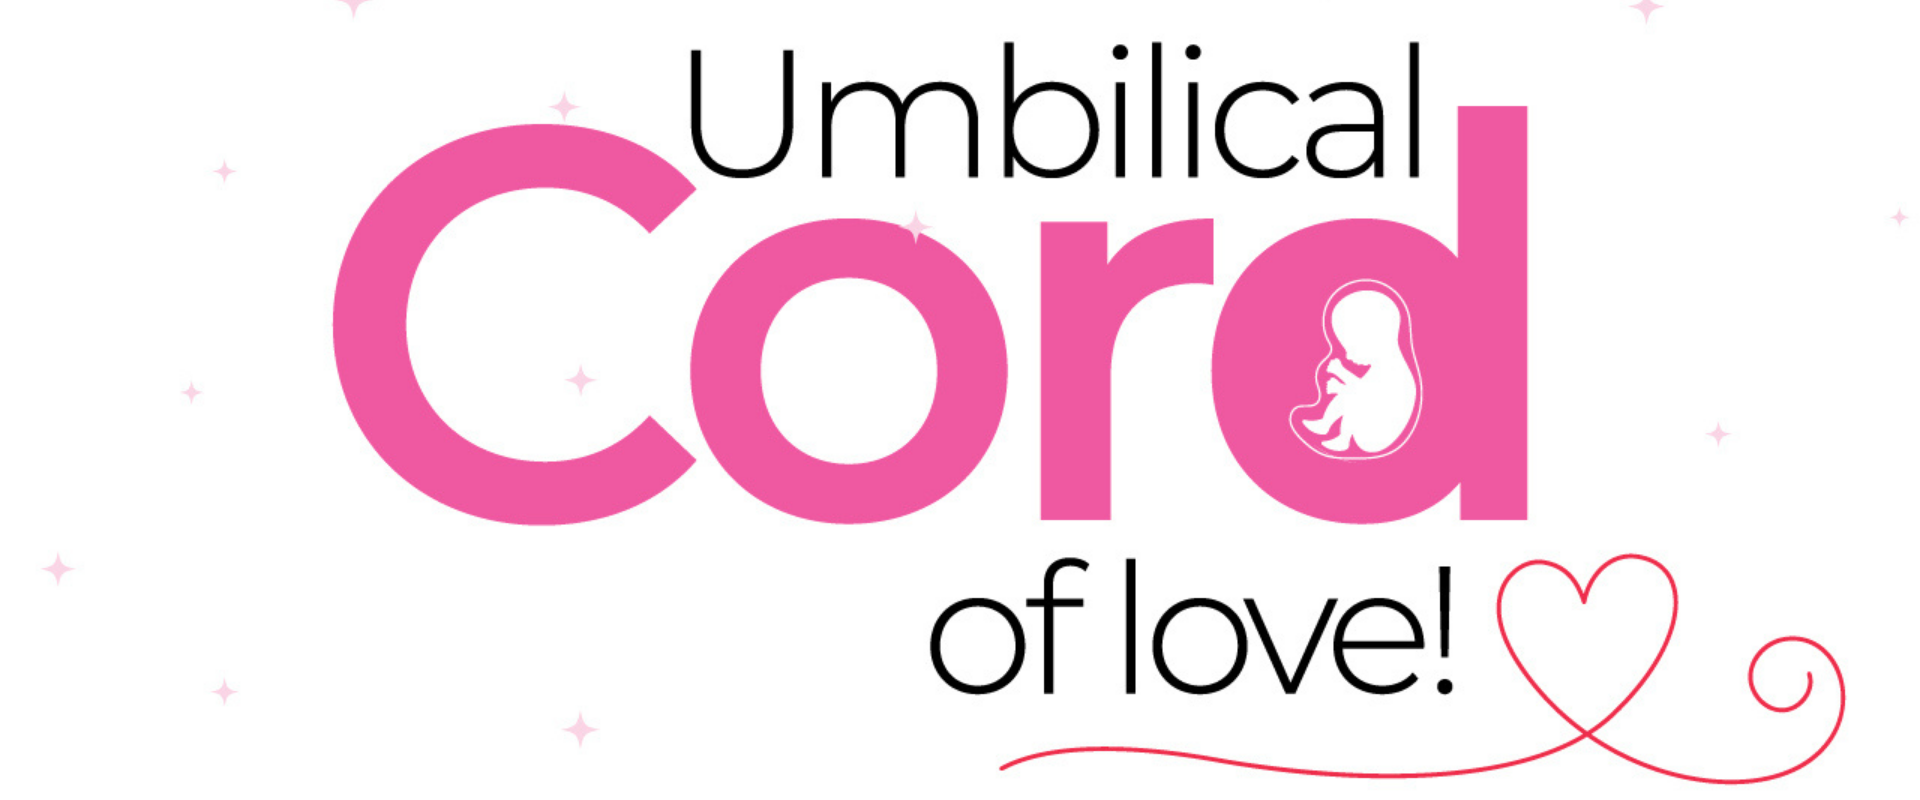 Umbilical Cord of Love